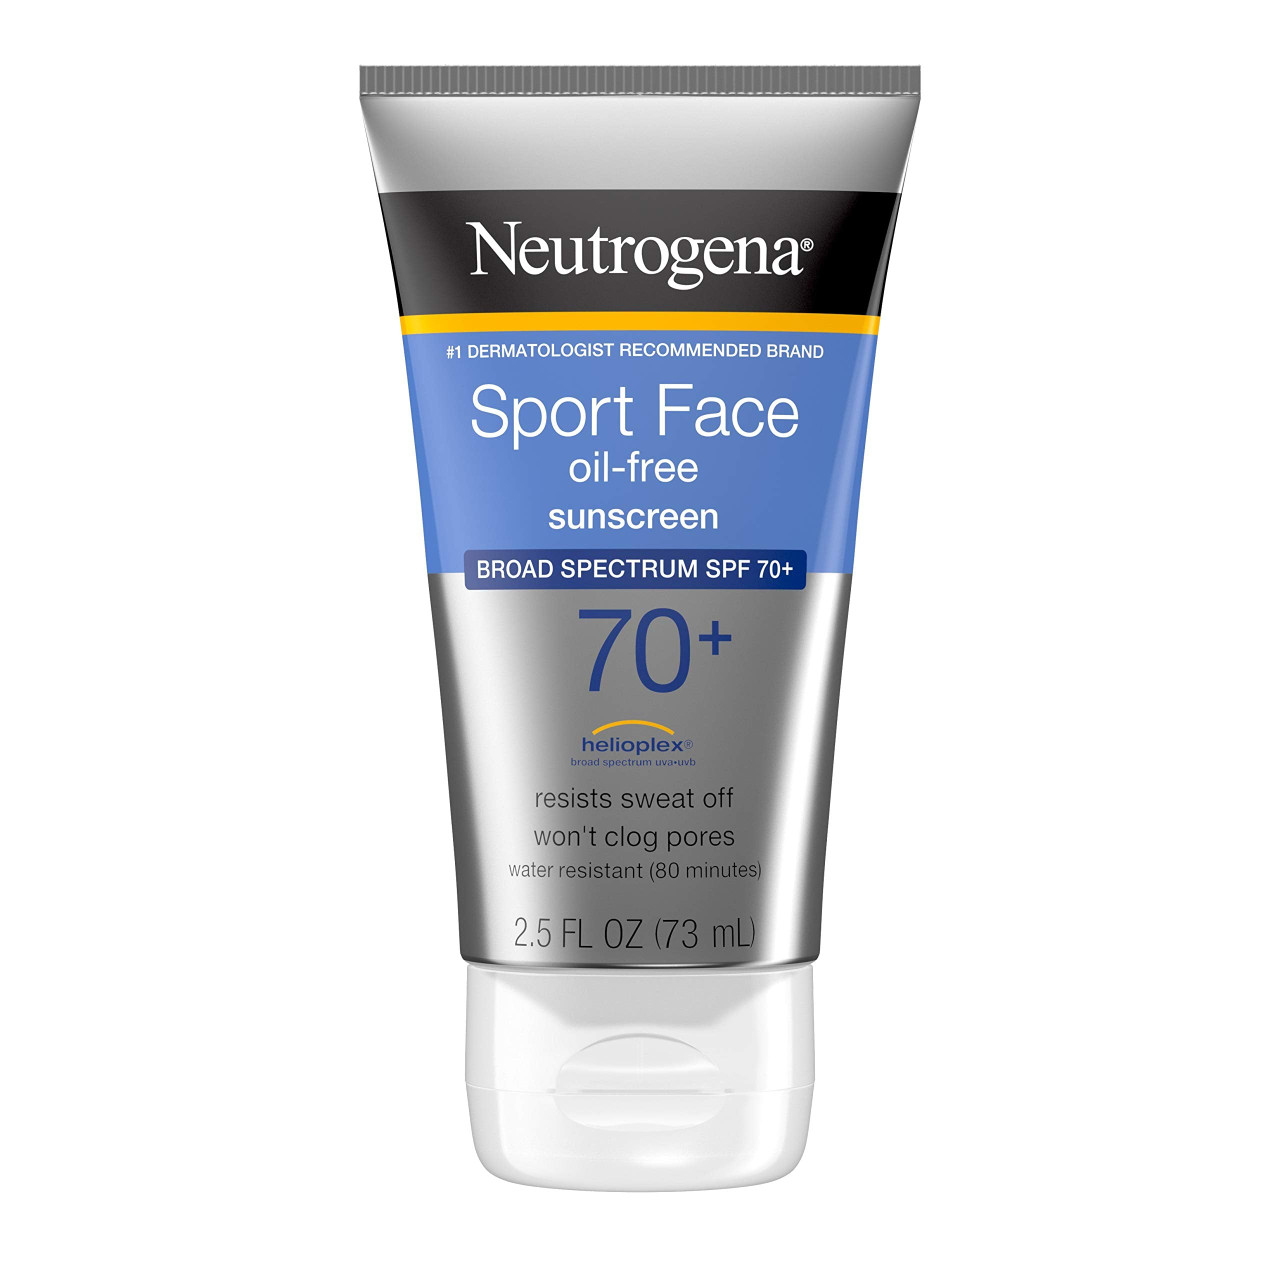  Neutrogena Ultra Sheer Liquid Daily Facial Sunscreen with Broad  Spectrum SPF 70, Non-Comedogenic, Oil-Free & PABA-Free Weightless UVA/UVB  Sun Protection, 1.4 fl. oz : Beauty & Personal Care